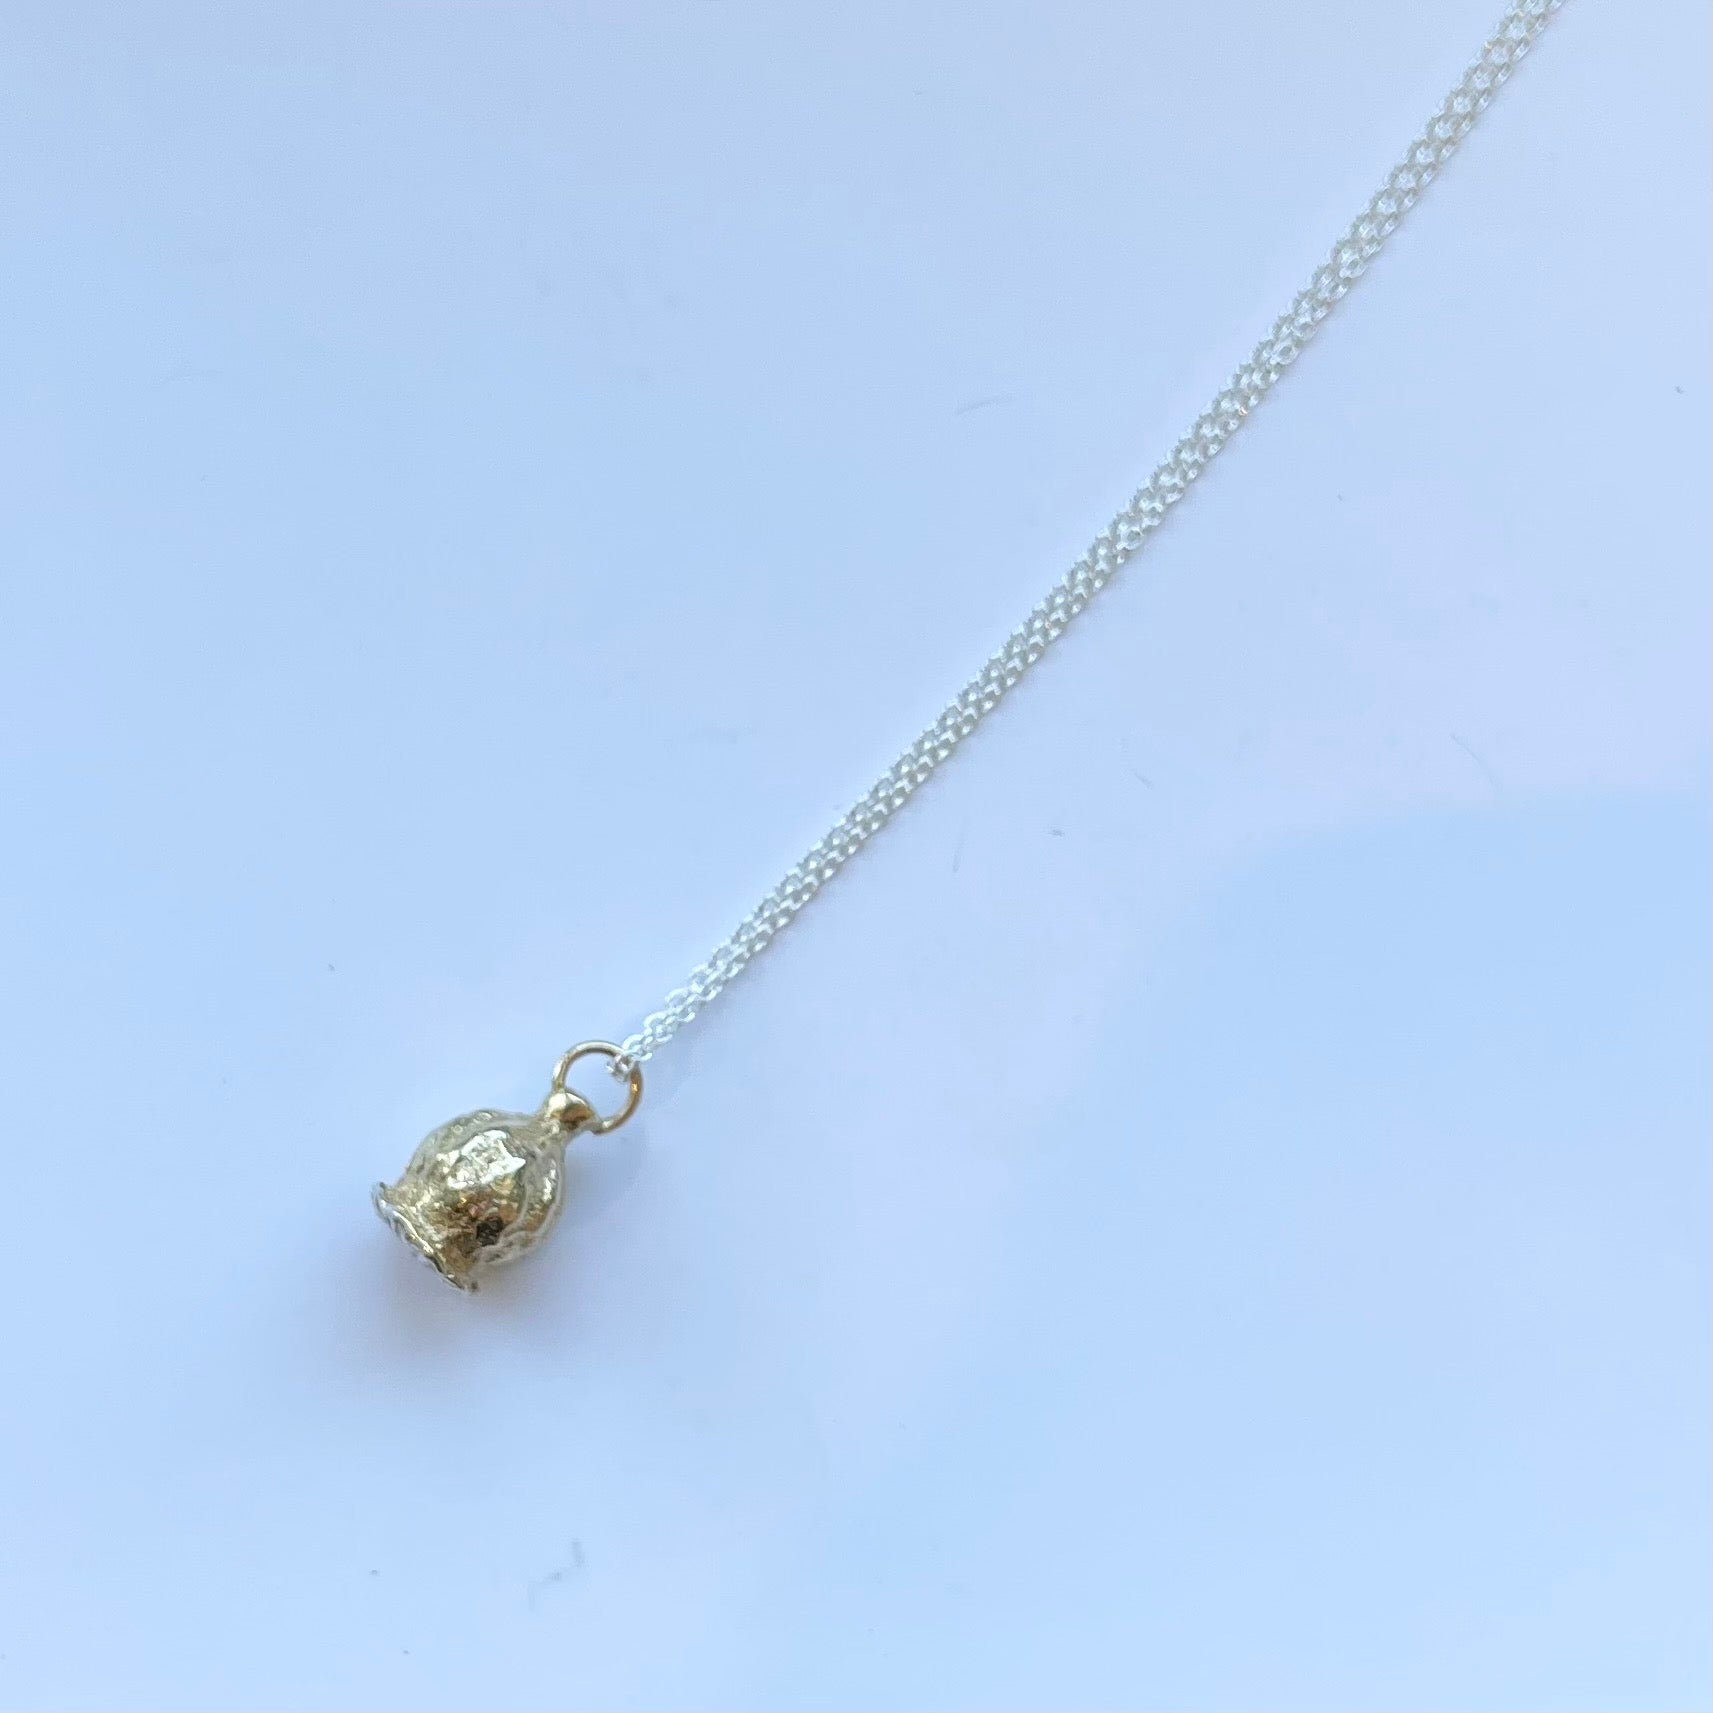 Poppy seed head necklace gold